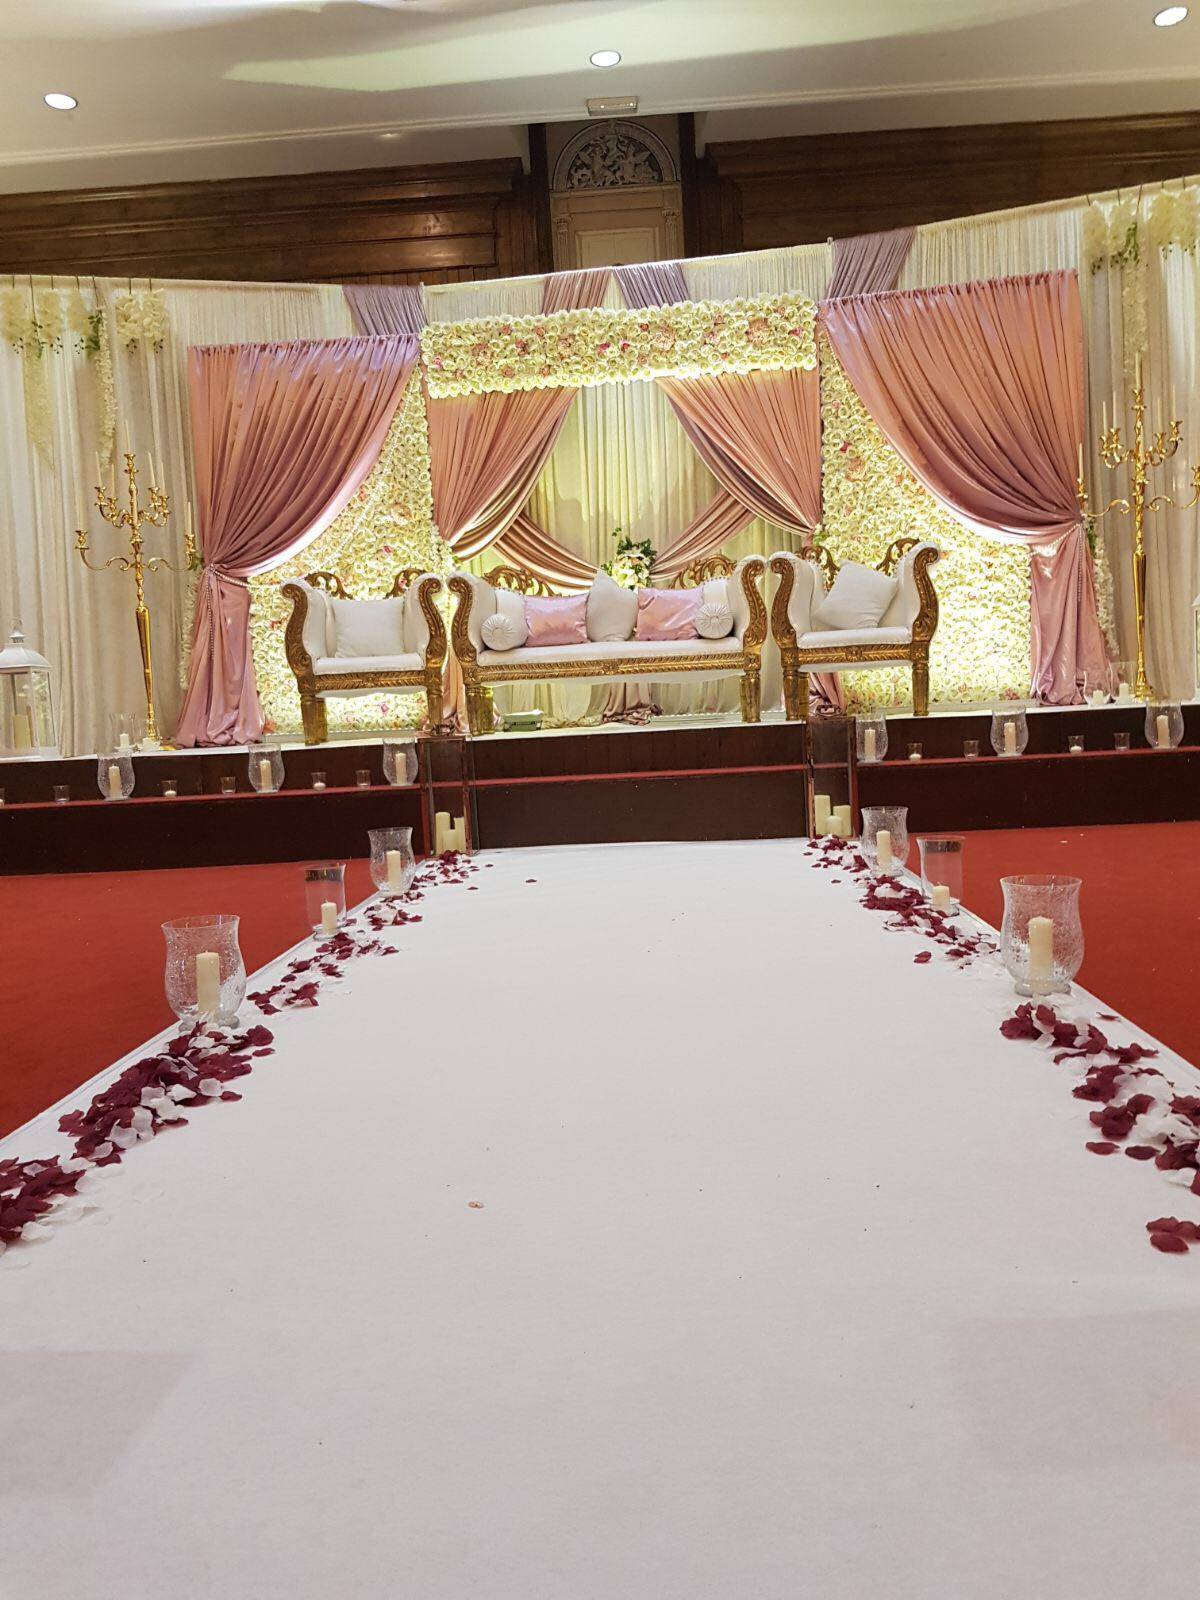 a white table with rose petals on it.